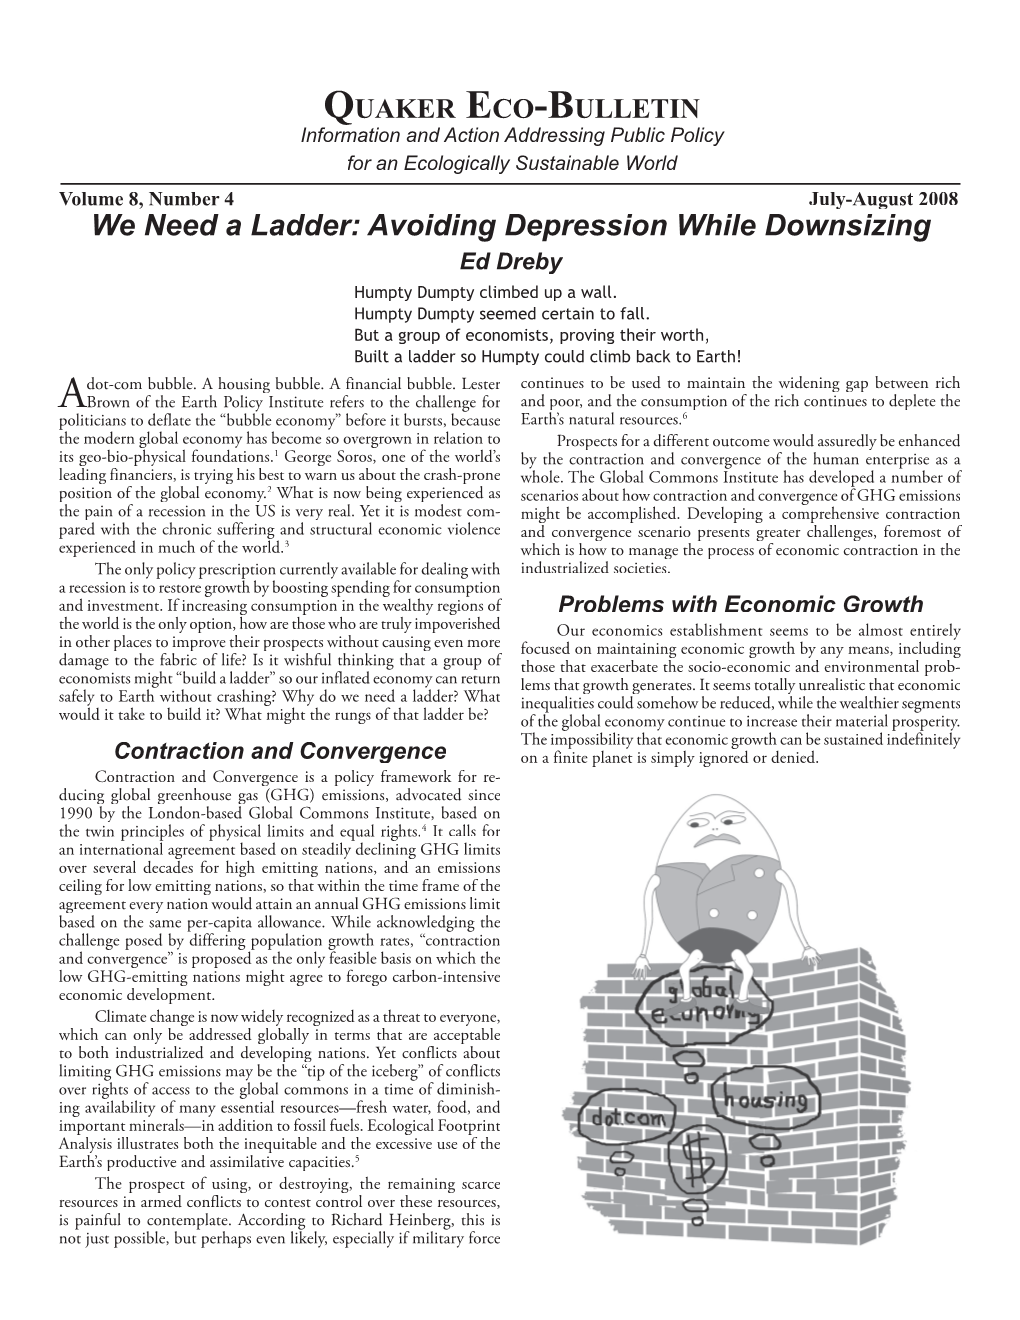 We Need a Ladder: Avoiding Depression While Downsizing Ed Dreby Humpty Dumpty Climbed up a Wall